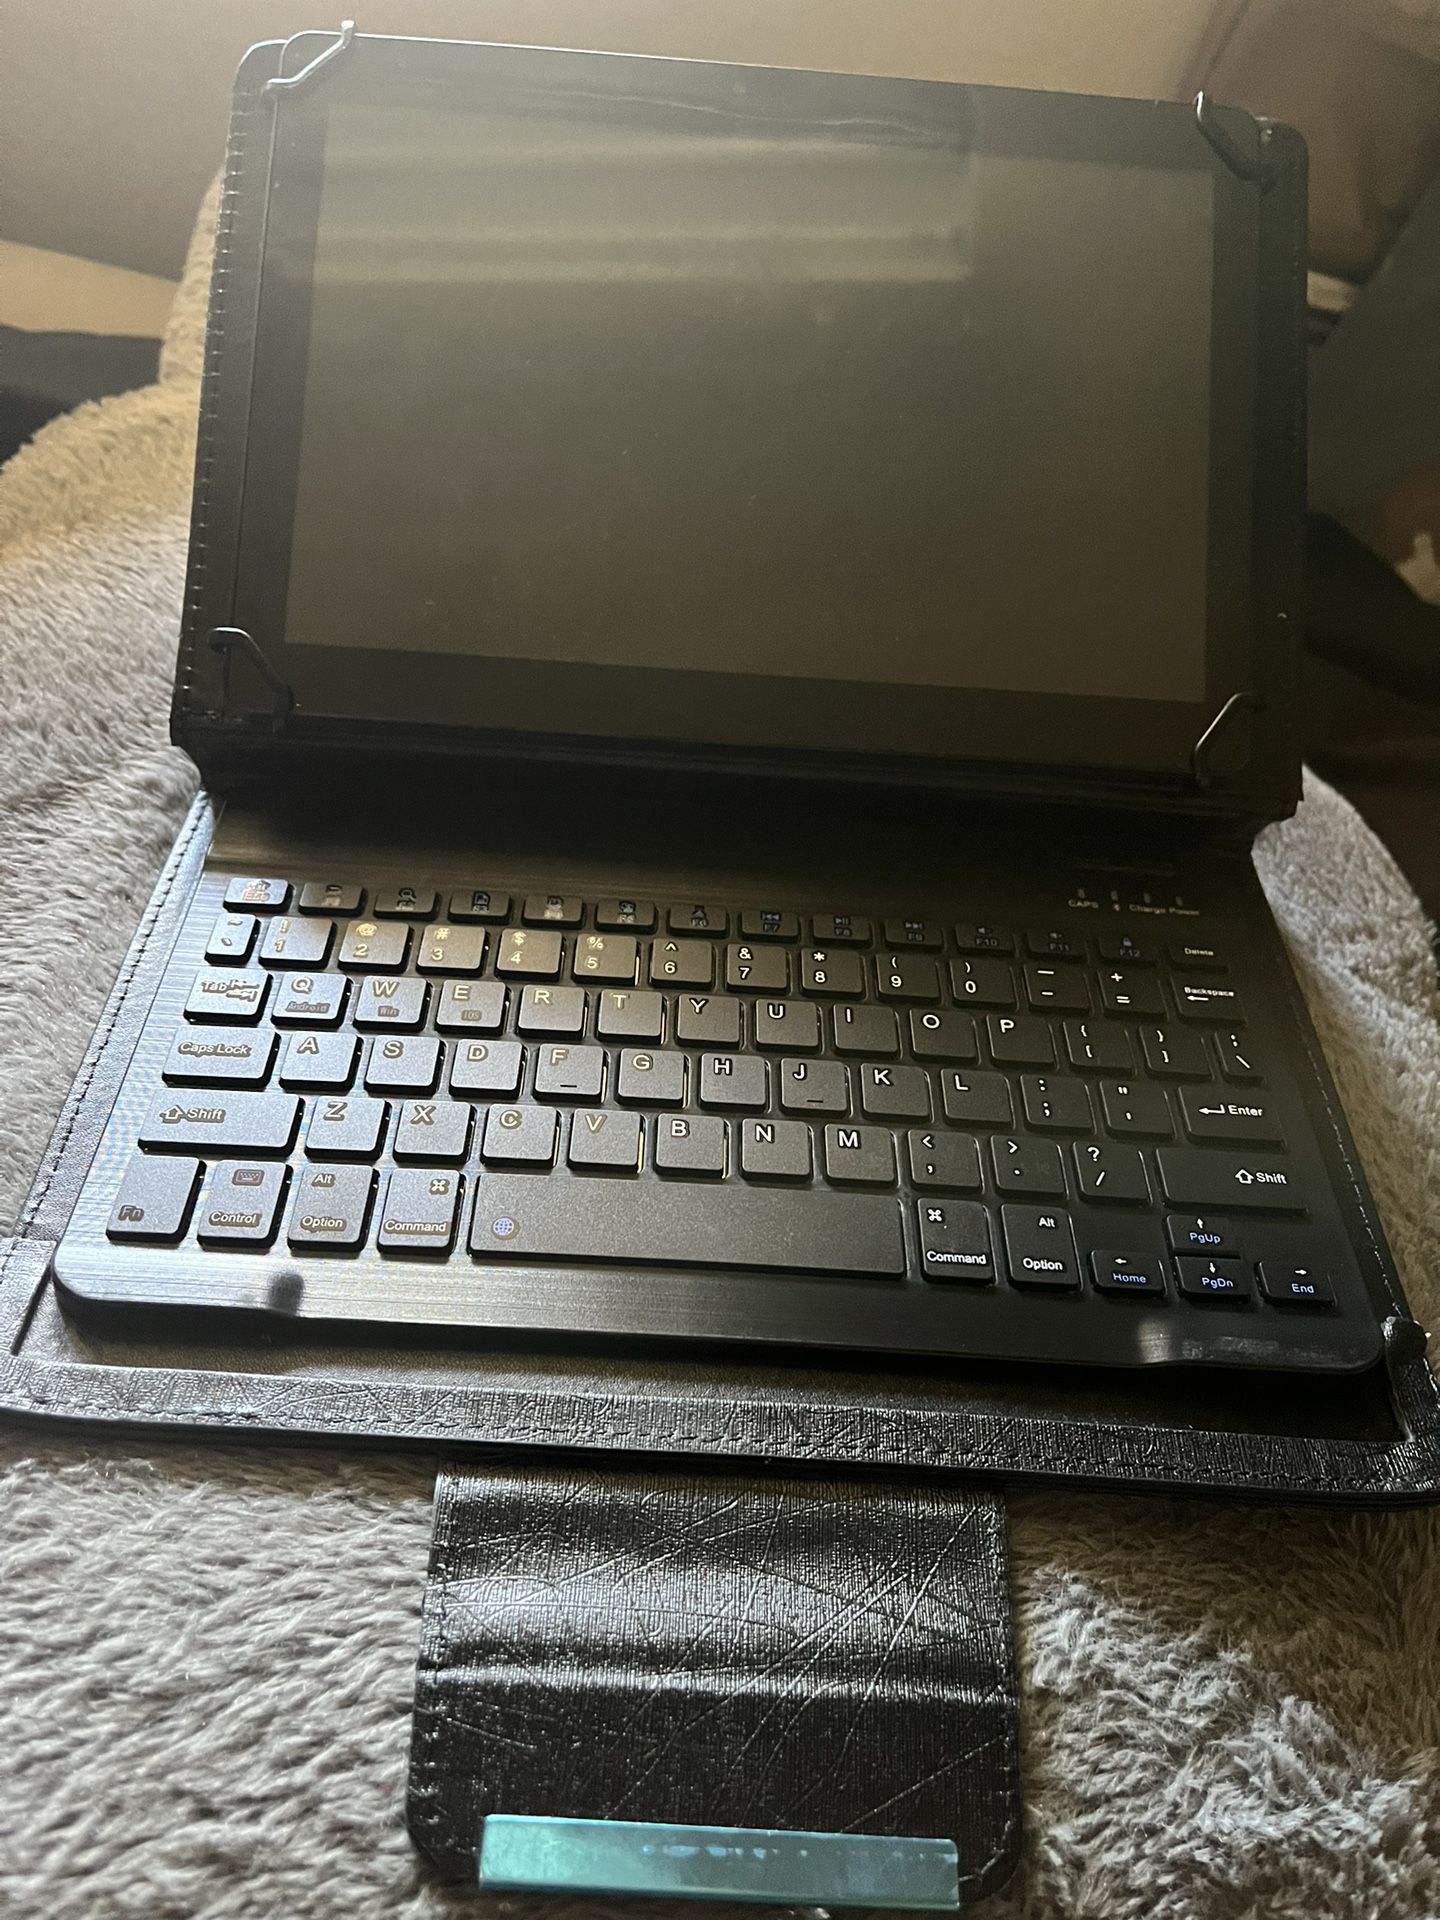 Tablet With Keyboard 